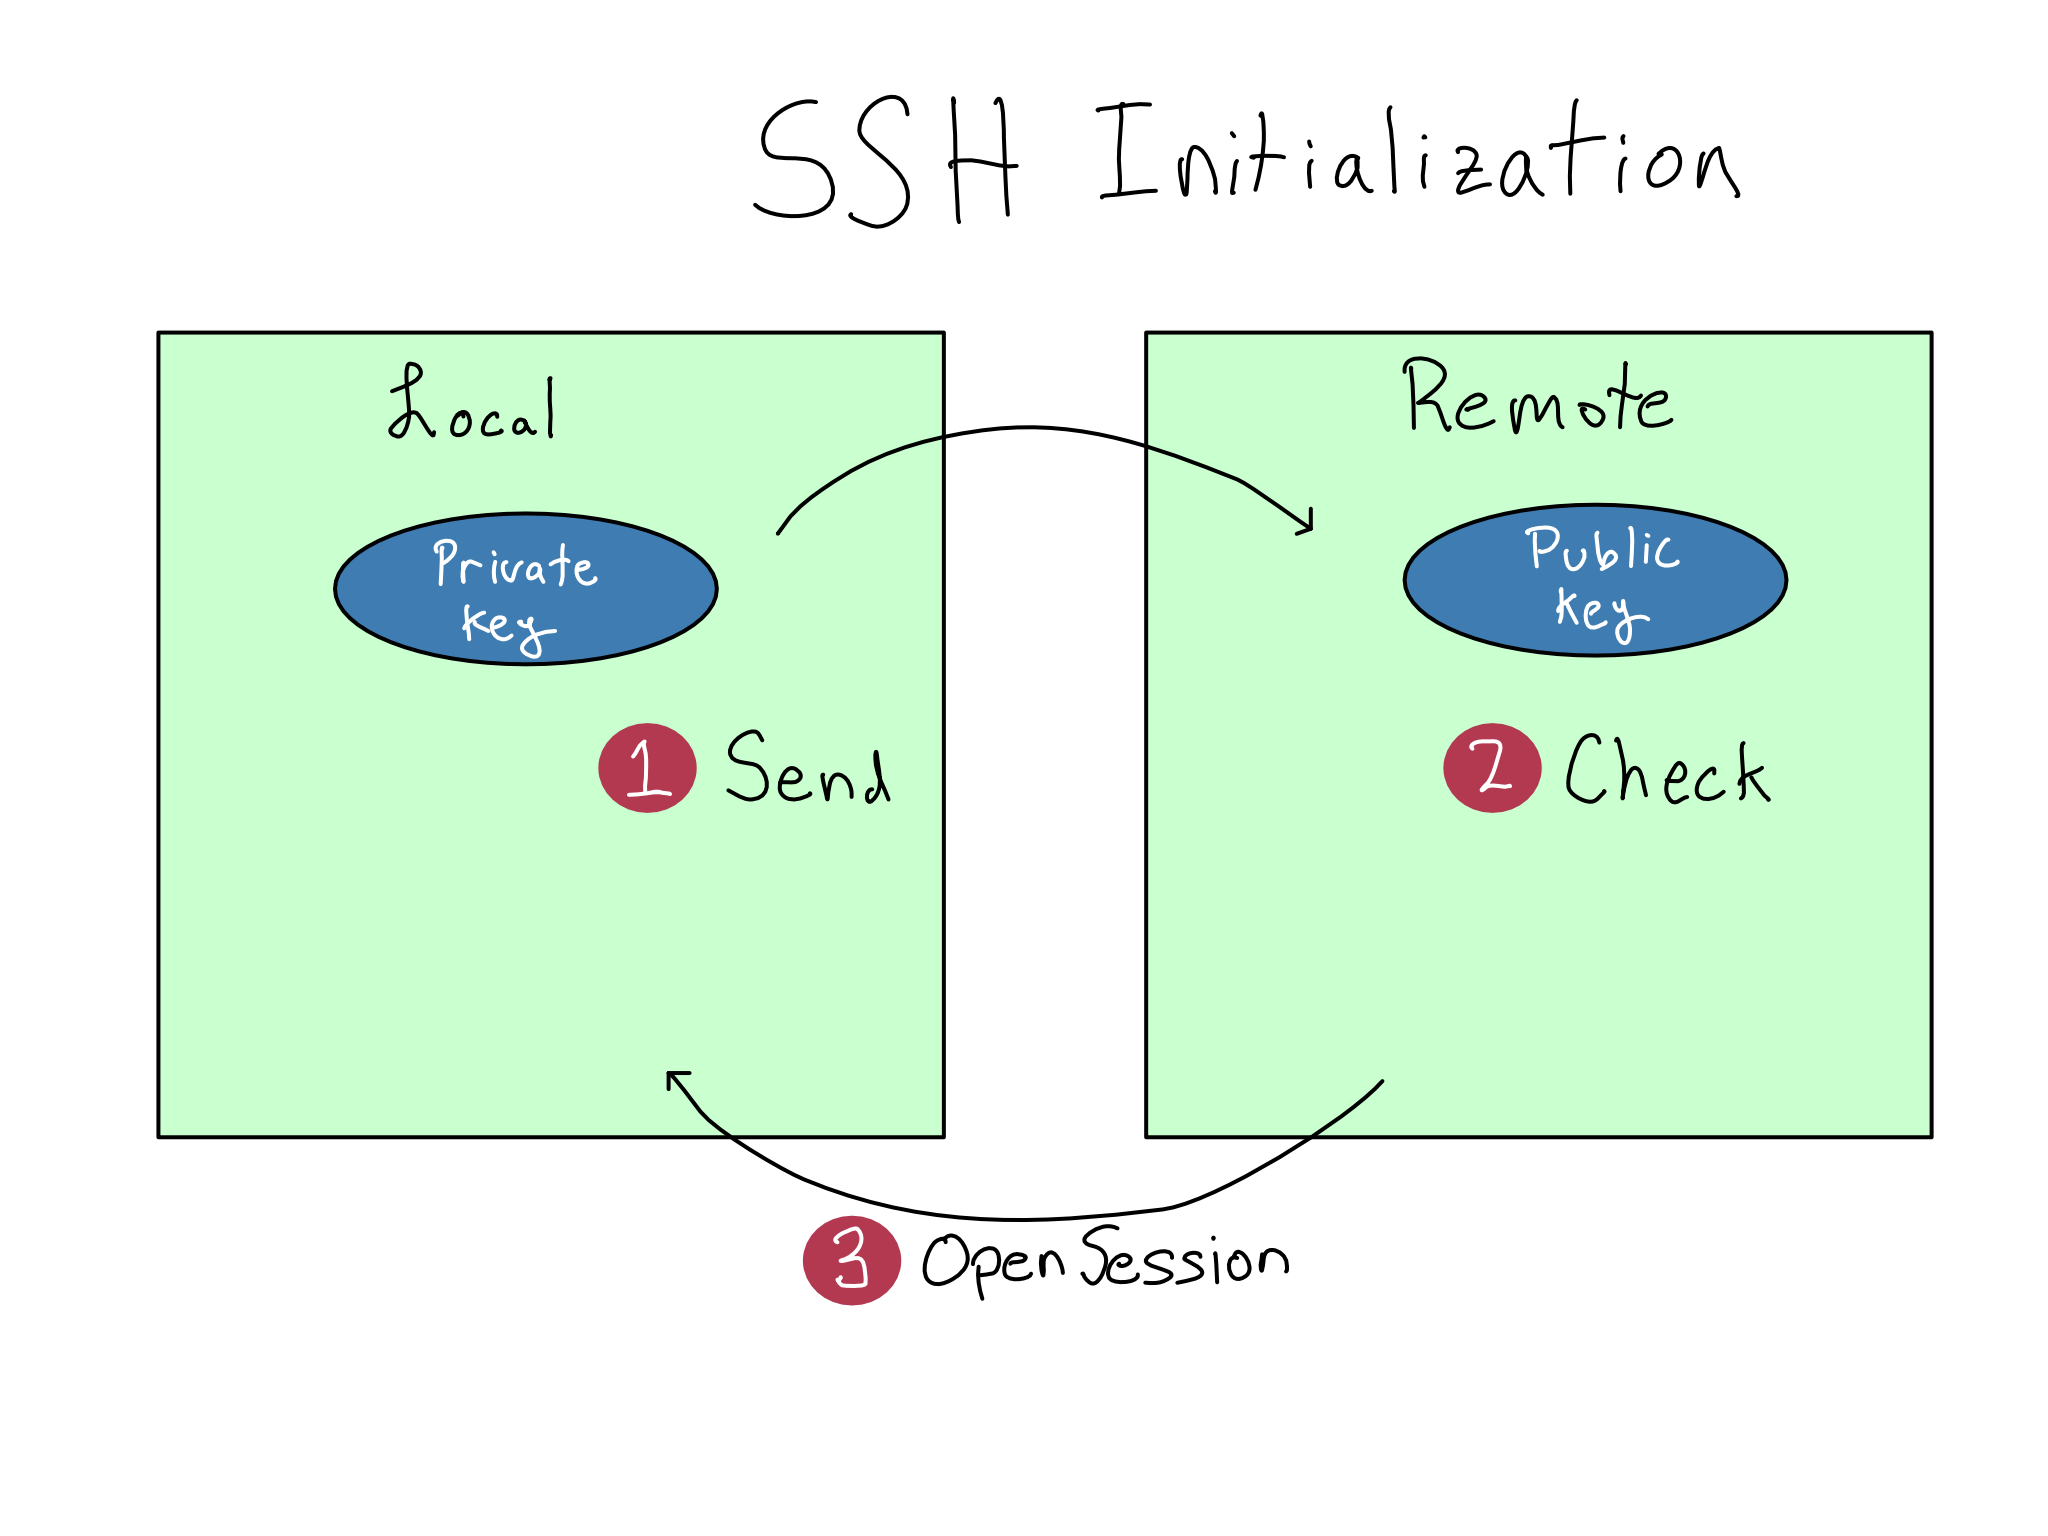 A diagram of SSH initialization. The local host sends the private key, the remote checks against the public key, and then opens the session.